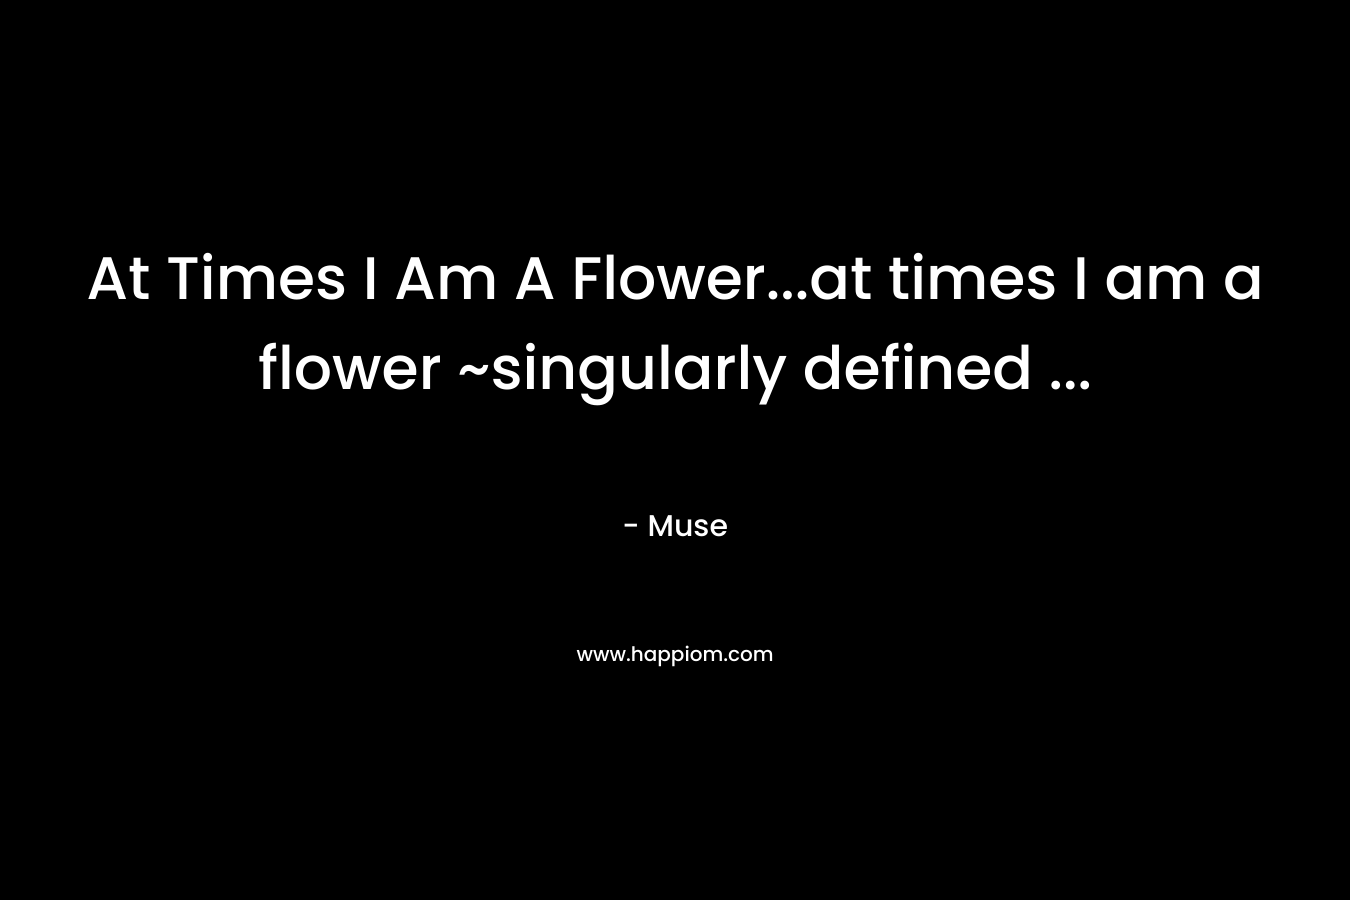 At Times I Am A Flower...at times I am a flower ~singularly defined ...